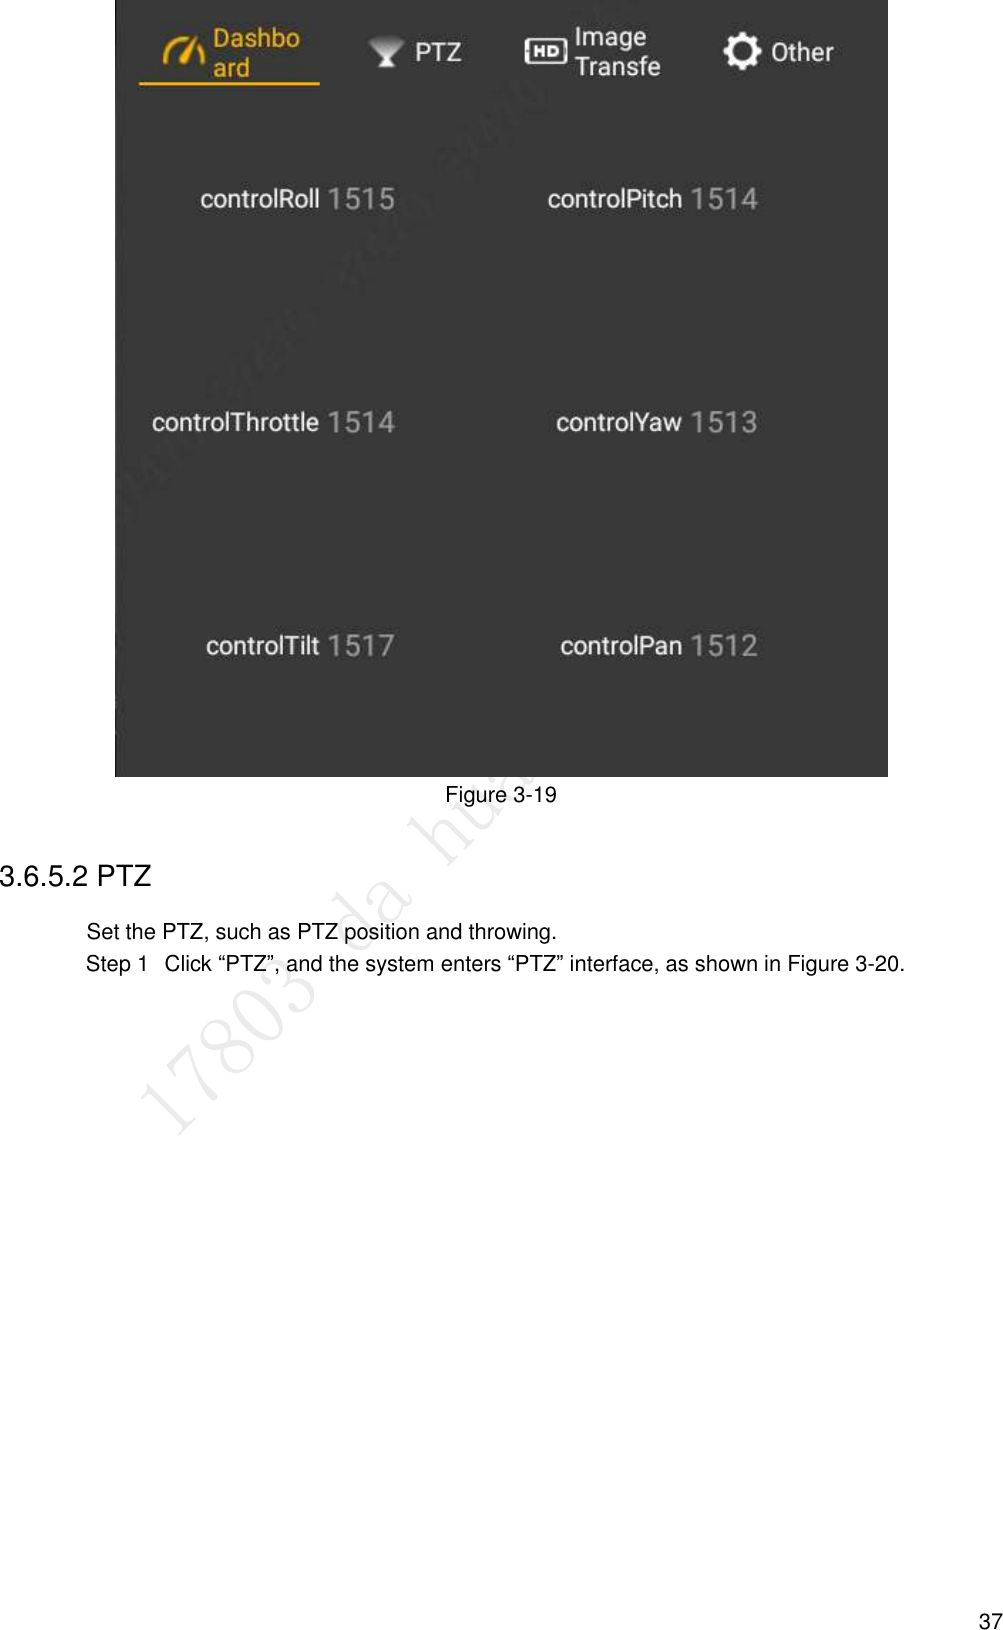  37  Figure 3-19 3.6.5.2 PTZ Set the PTZ, such as PTZ position and throwing.   Click “PTZ”, and the system enters “PTZ” interface, as shown in Figure 3-20. Step 1